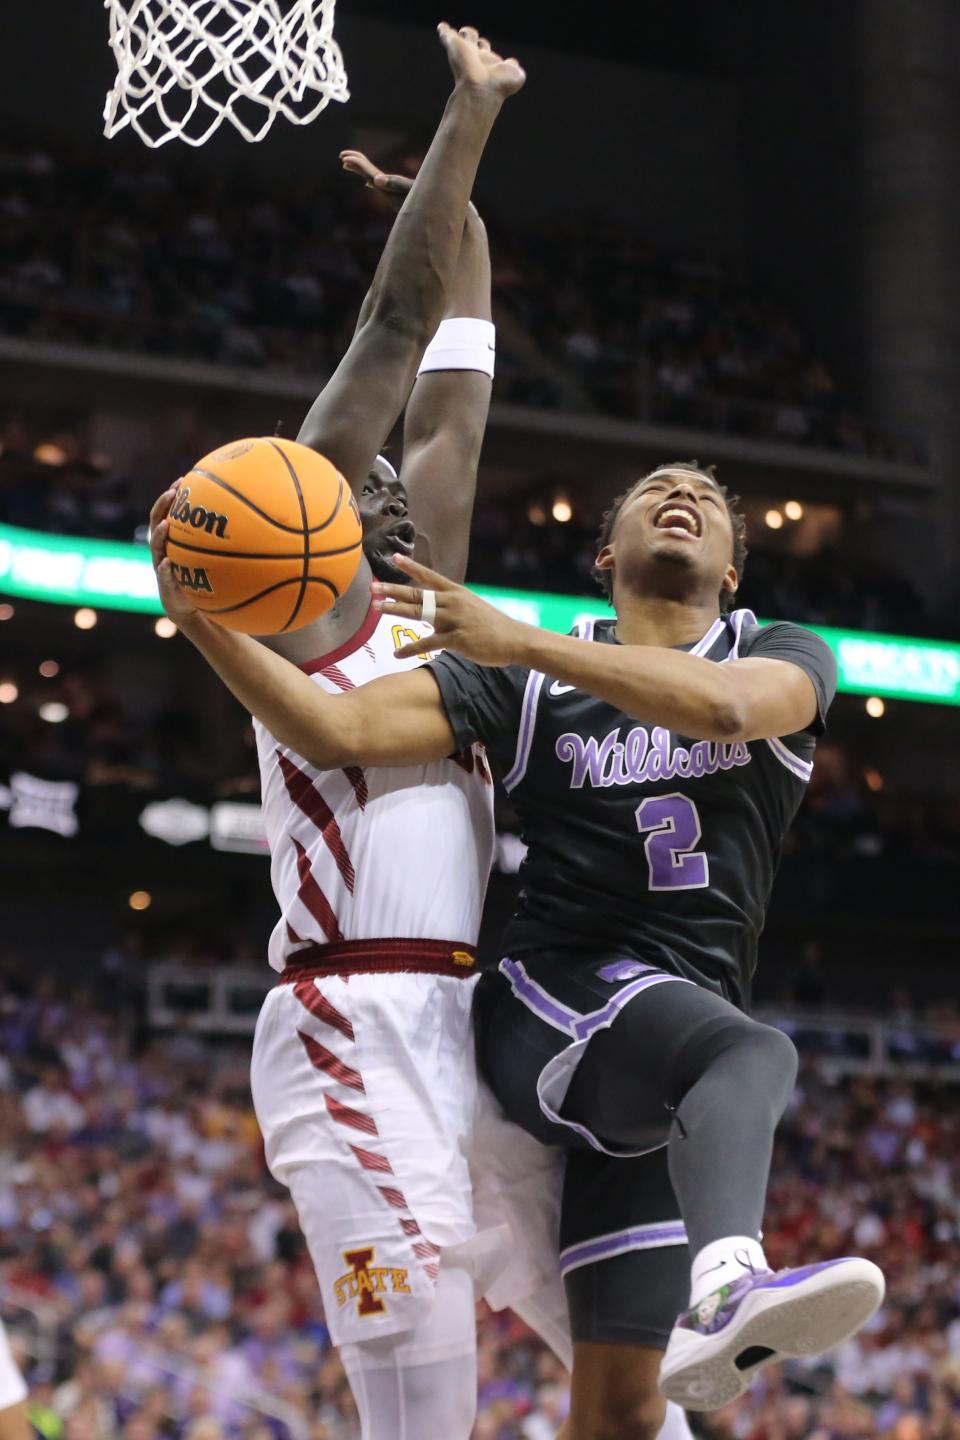 Kansas State guard Tylor Perry (2) attempts a layup against Iowa State's Omaha Biliew (33) during their Big 12 Tournament quarterfinal on Thursday at T-Mobile Center. Perry will lead the Wildcats against Iowa on Tuesday in a first-round NIT game in Iowa City.